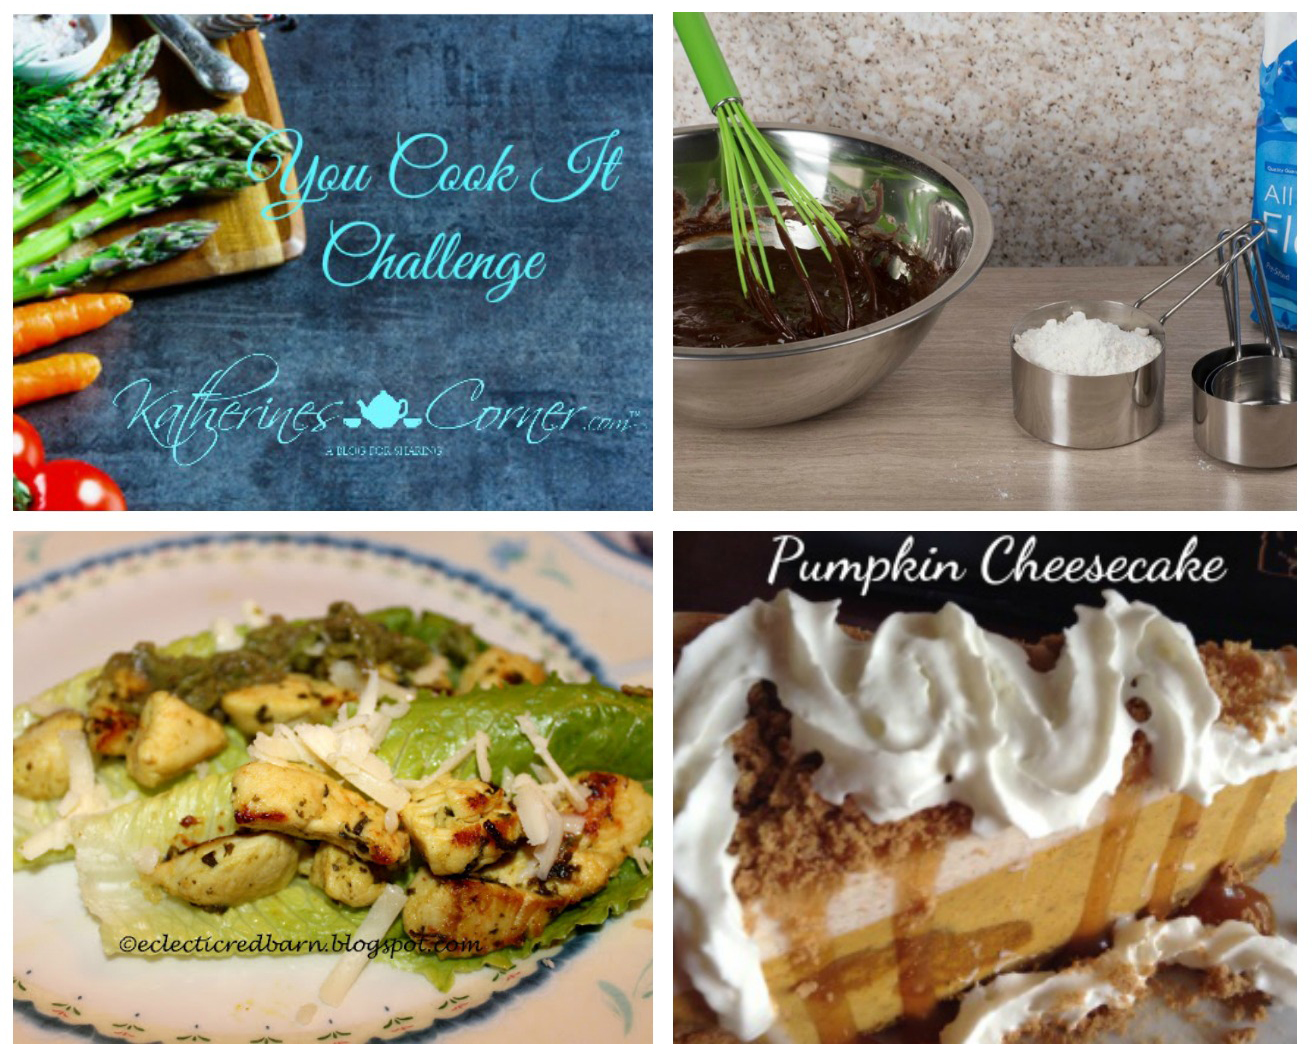 Winning Recipes of the You Cook It Challenge